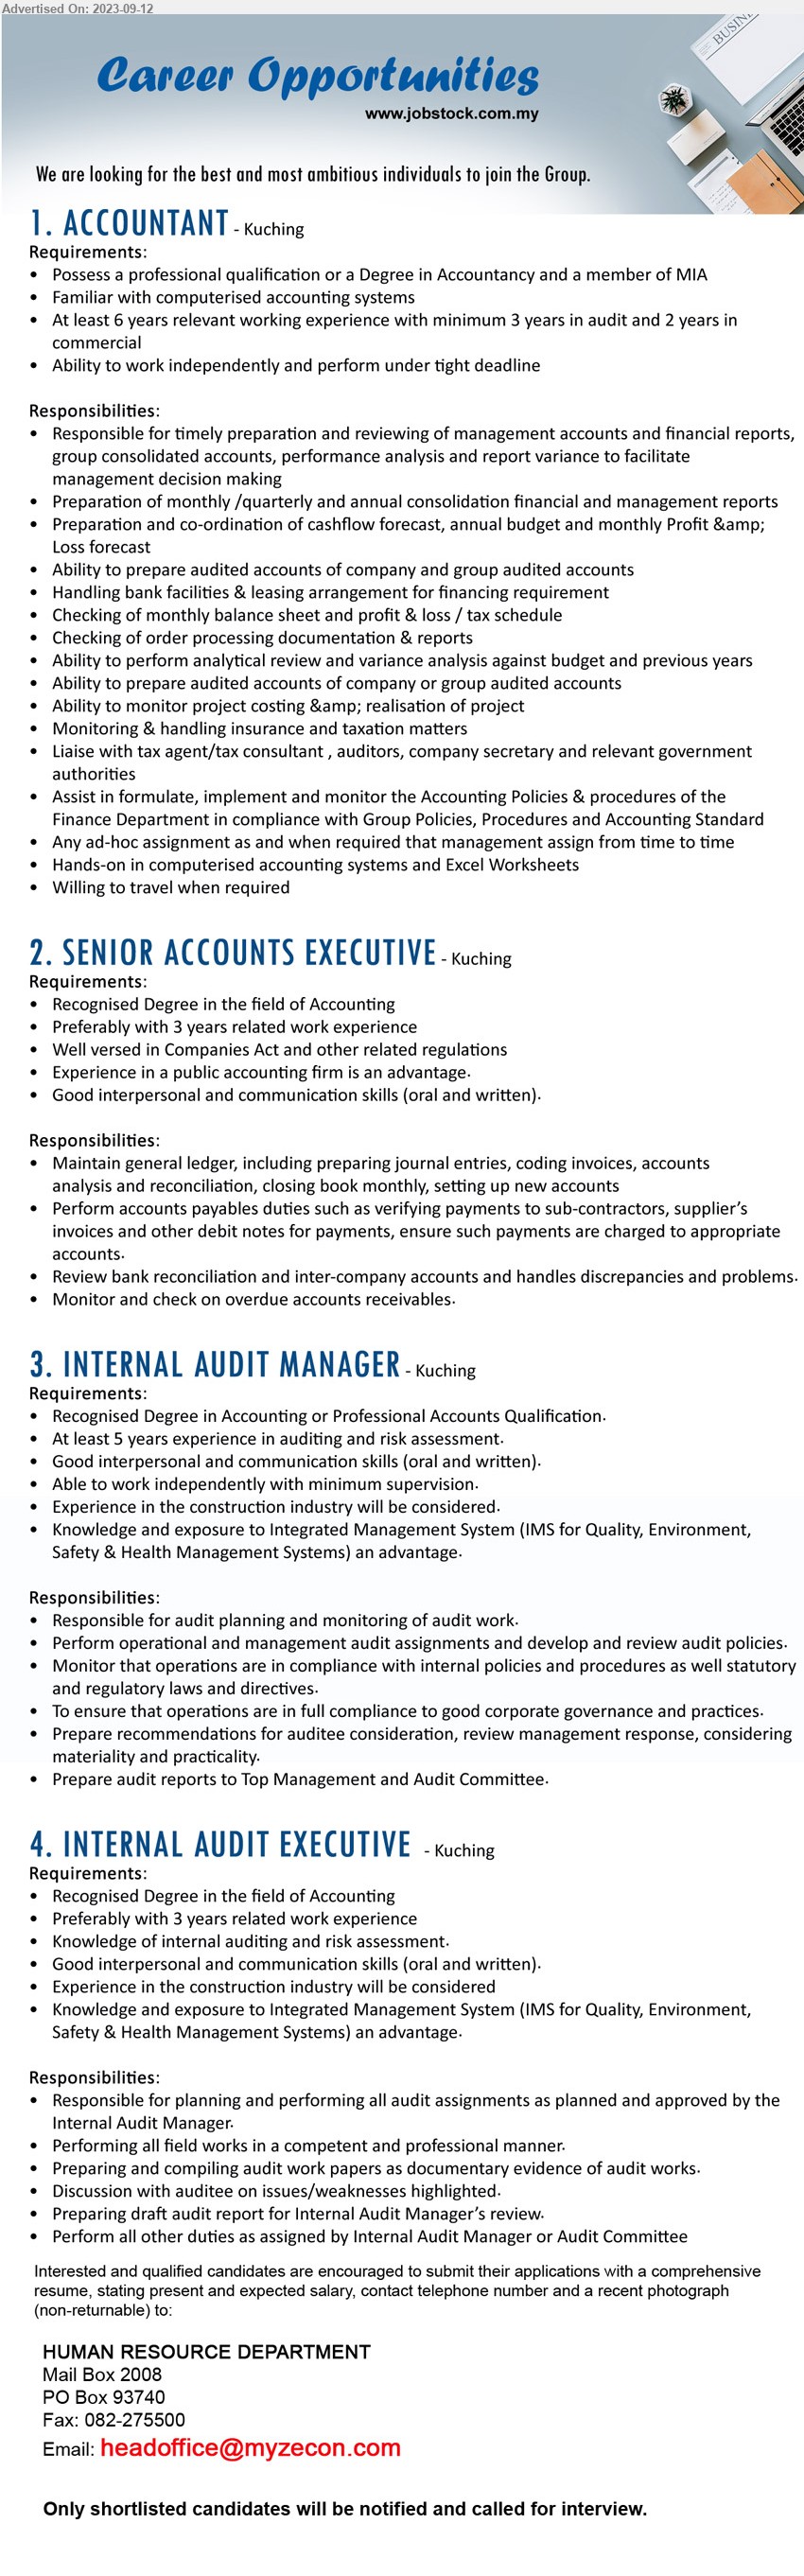 ADVERTISER - 1. ACCOUNTANT (Kuching), Degree in Accountancy and a member of MIA, At least 6 years relevant working experience with minimum 3 years in audit and 2 years in commercial,...
2. SENIOR ACCOUNTS EXECUTIVE (Kuching), Recognised Degree in the field of Accounting, Preferably with 3 yrs. exp.,...
3. INTERNAL AUDIT MANAGER (Kuching), Recognised Degree in Accounting or Professional Accounts Qualification, At least 5 yrs. exp.,...
4. INTERNAL AUDIT EXECUTIVE (Kuching), Recognised Degree in the field of Accounting, Preferably with 3 yrs. exp.,...
Email resume to ...